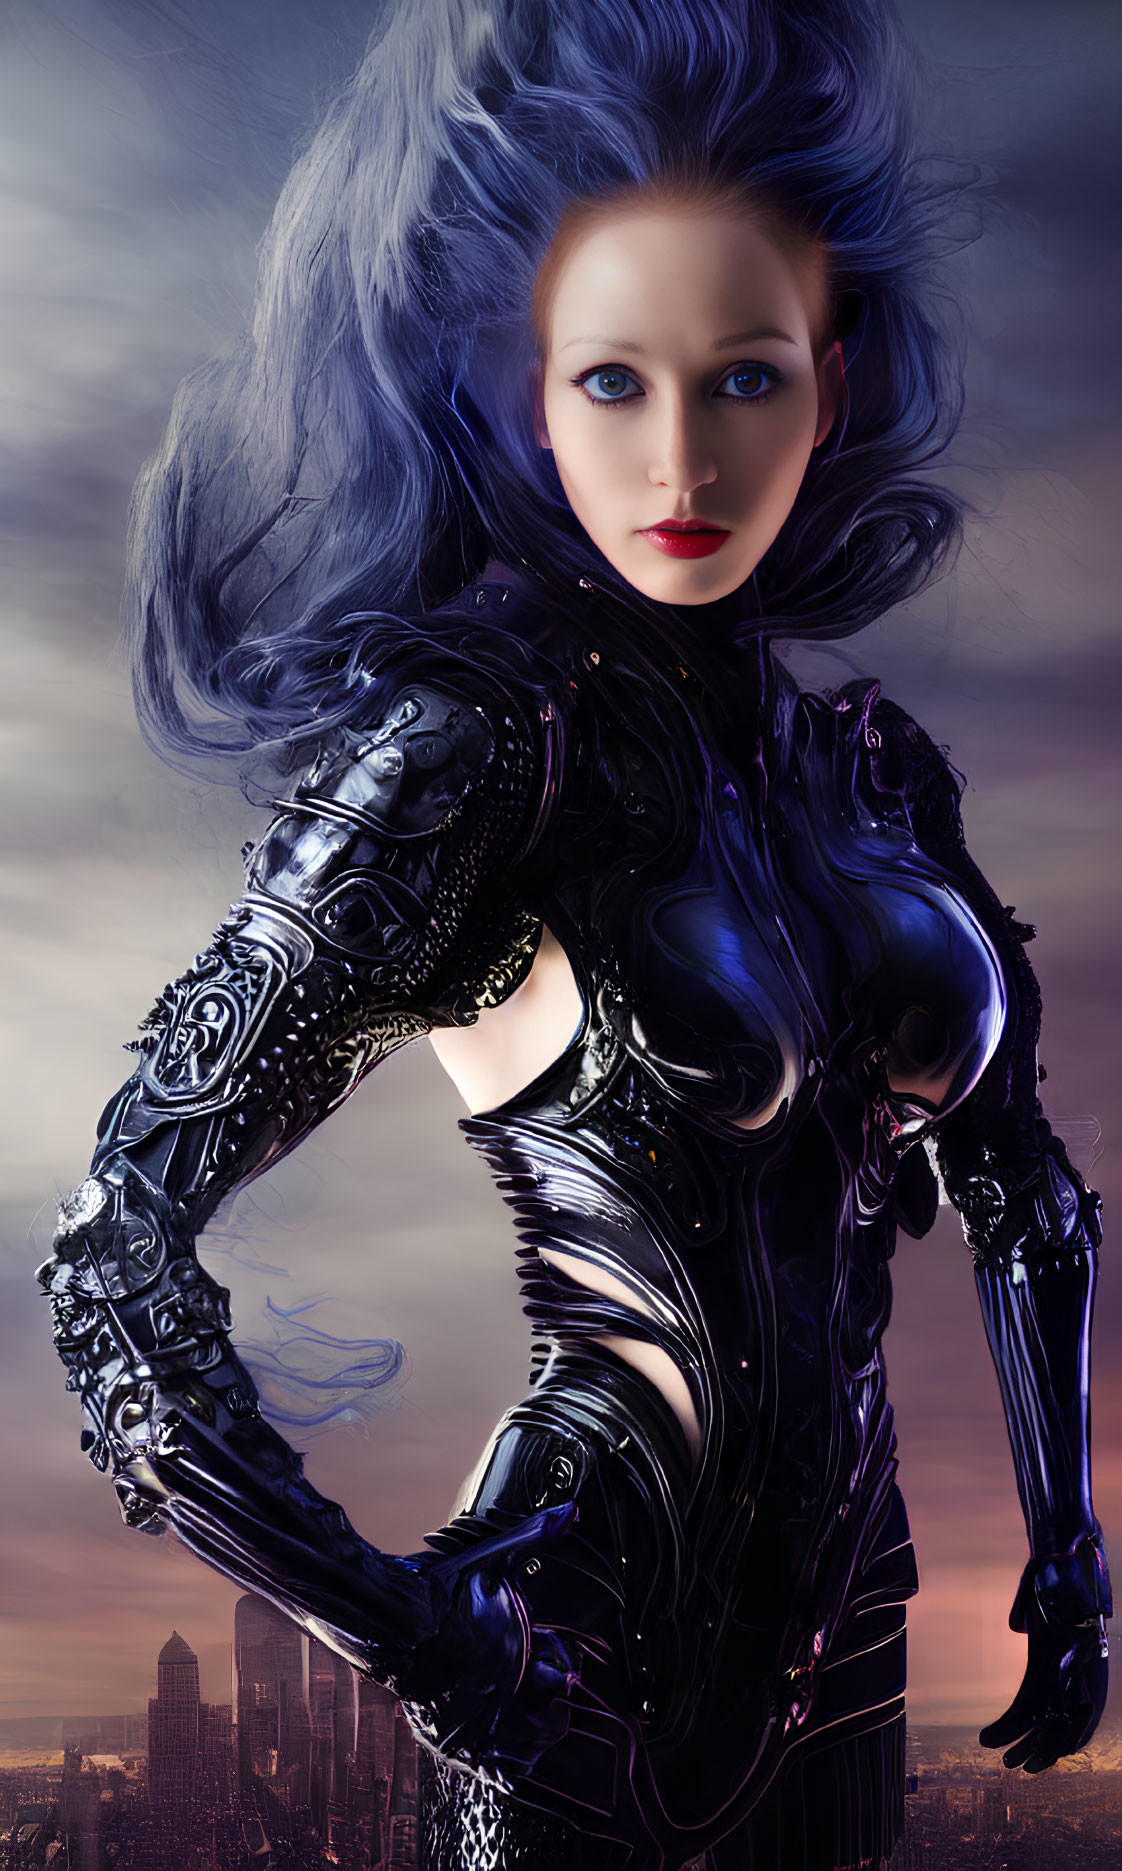 Digital artwork: Pale-skinned woman with blue eyes and hair in futuristic armor against cityscape.